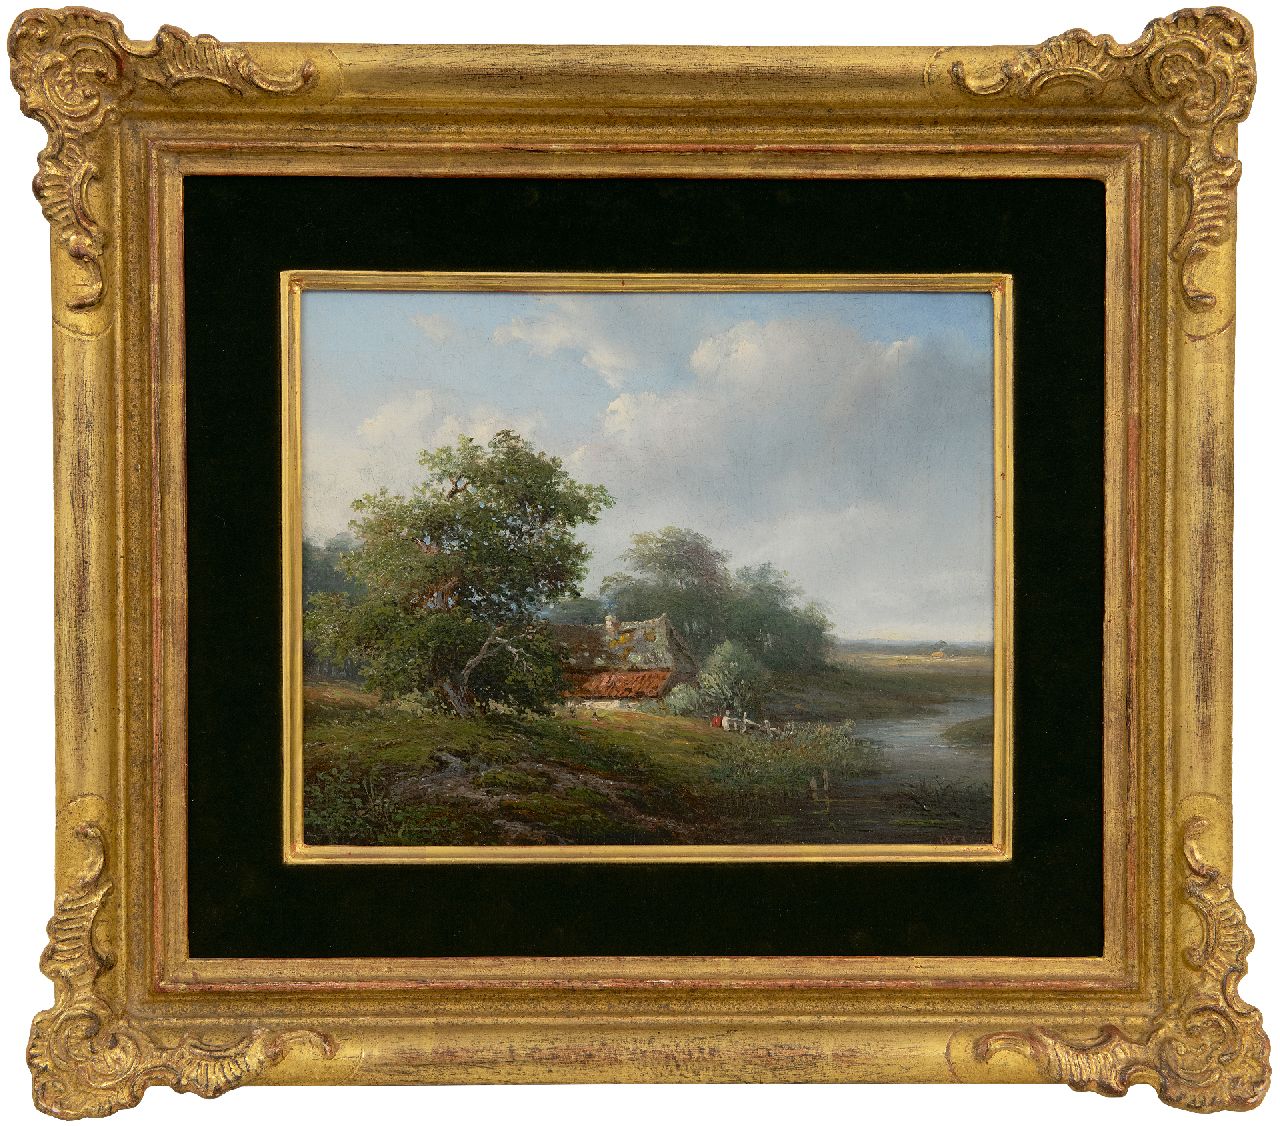 Vester W.  | Willem Vester | Paintings offered for sale | Summerlandscape with farmstead, oil on panel 22.0 x 27.3 cm, signed l.r. with initials and dated 1850